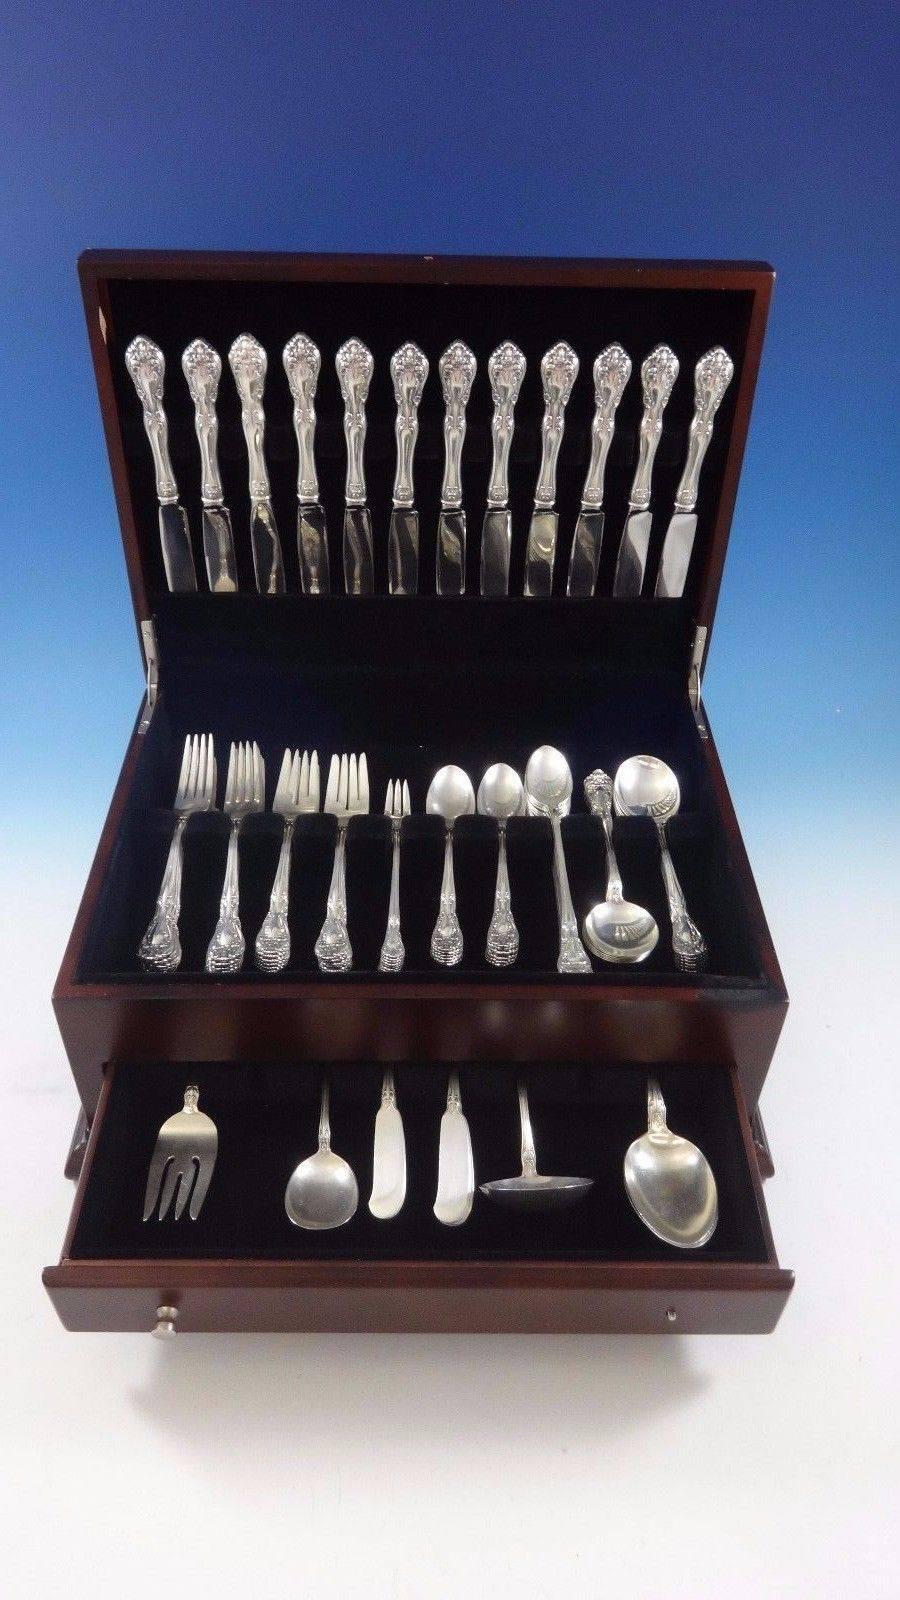 Chateau Rose by Alvin sterling silver flatware set, 101 pieces. This set includes: 

12 knives, 8 7/8